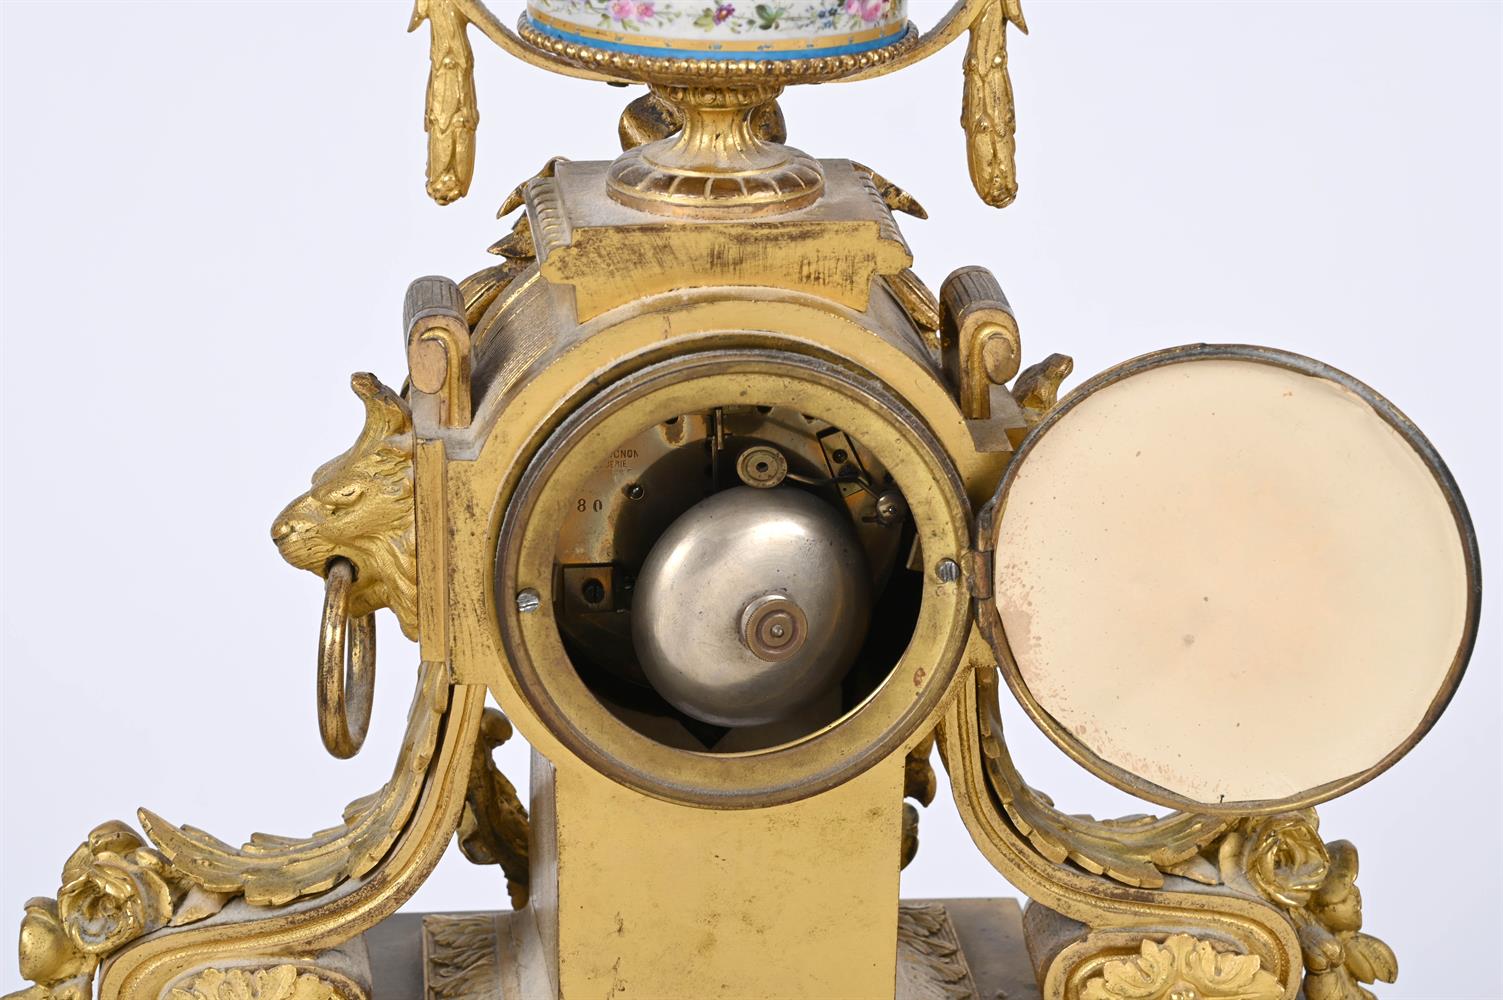 A FRENCH SEVRES STYLE PORCELAIN INSET ORMOLU MANTEL CLOCK - Image 4 of 4